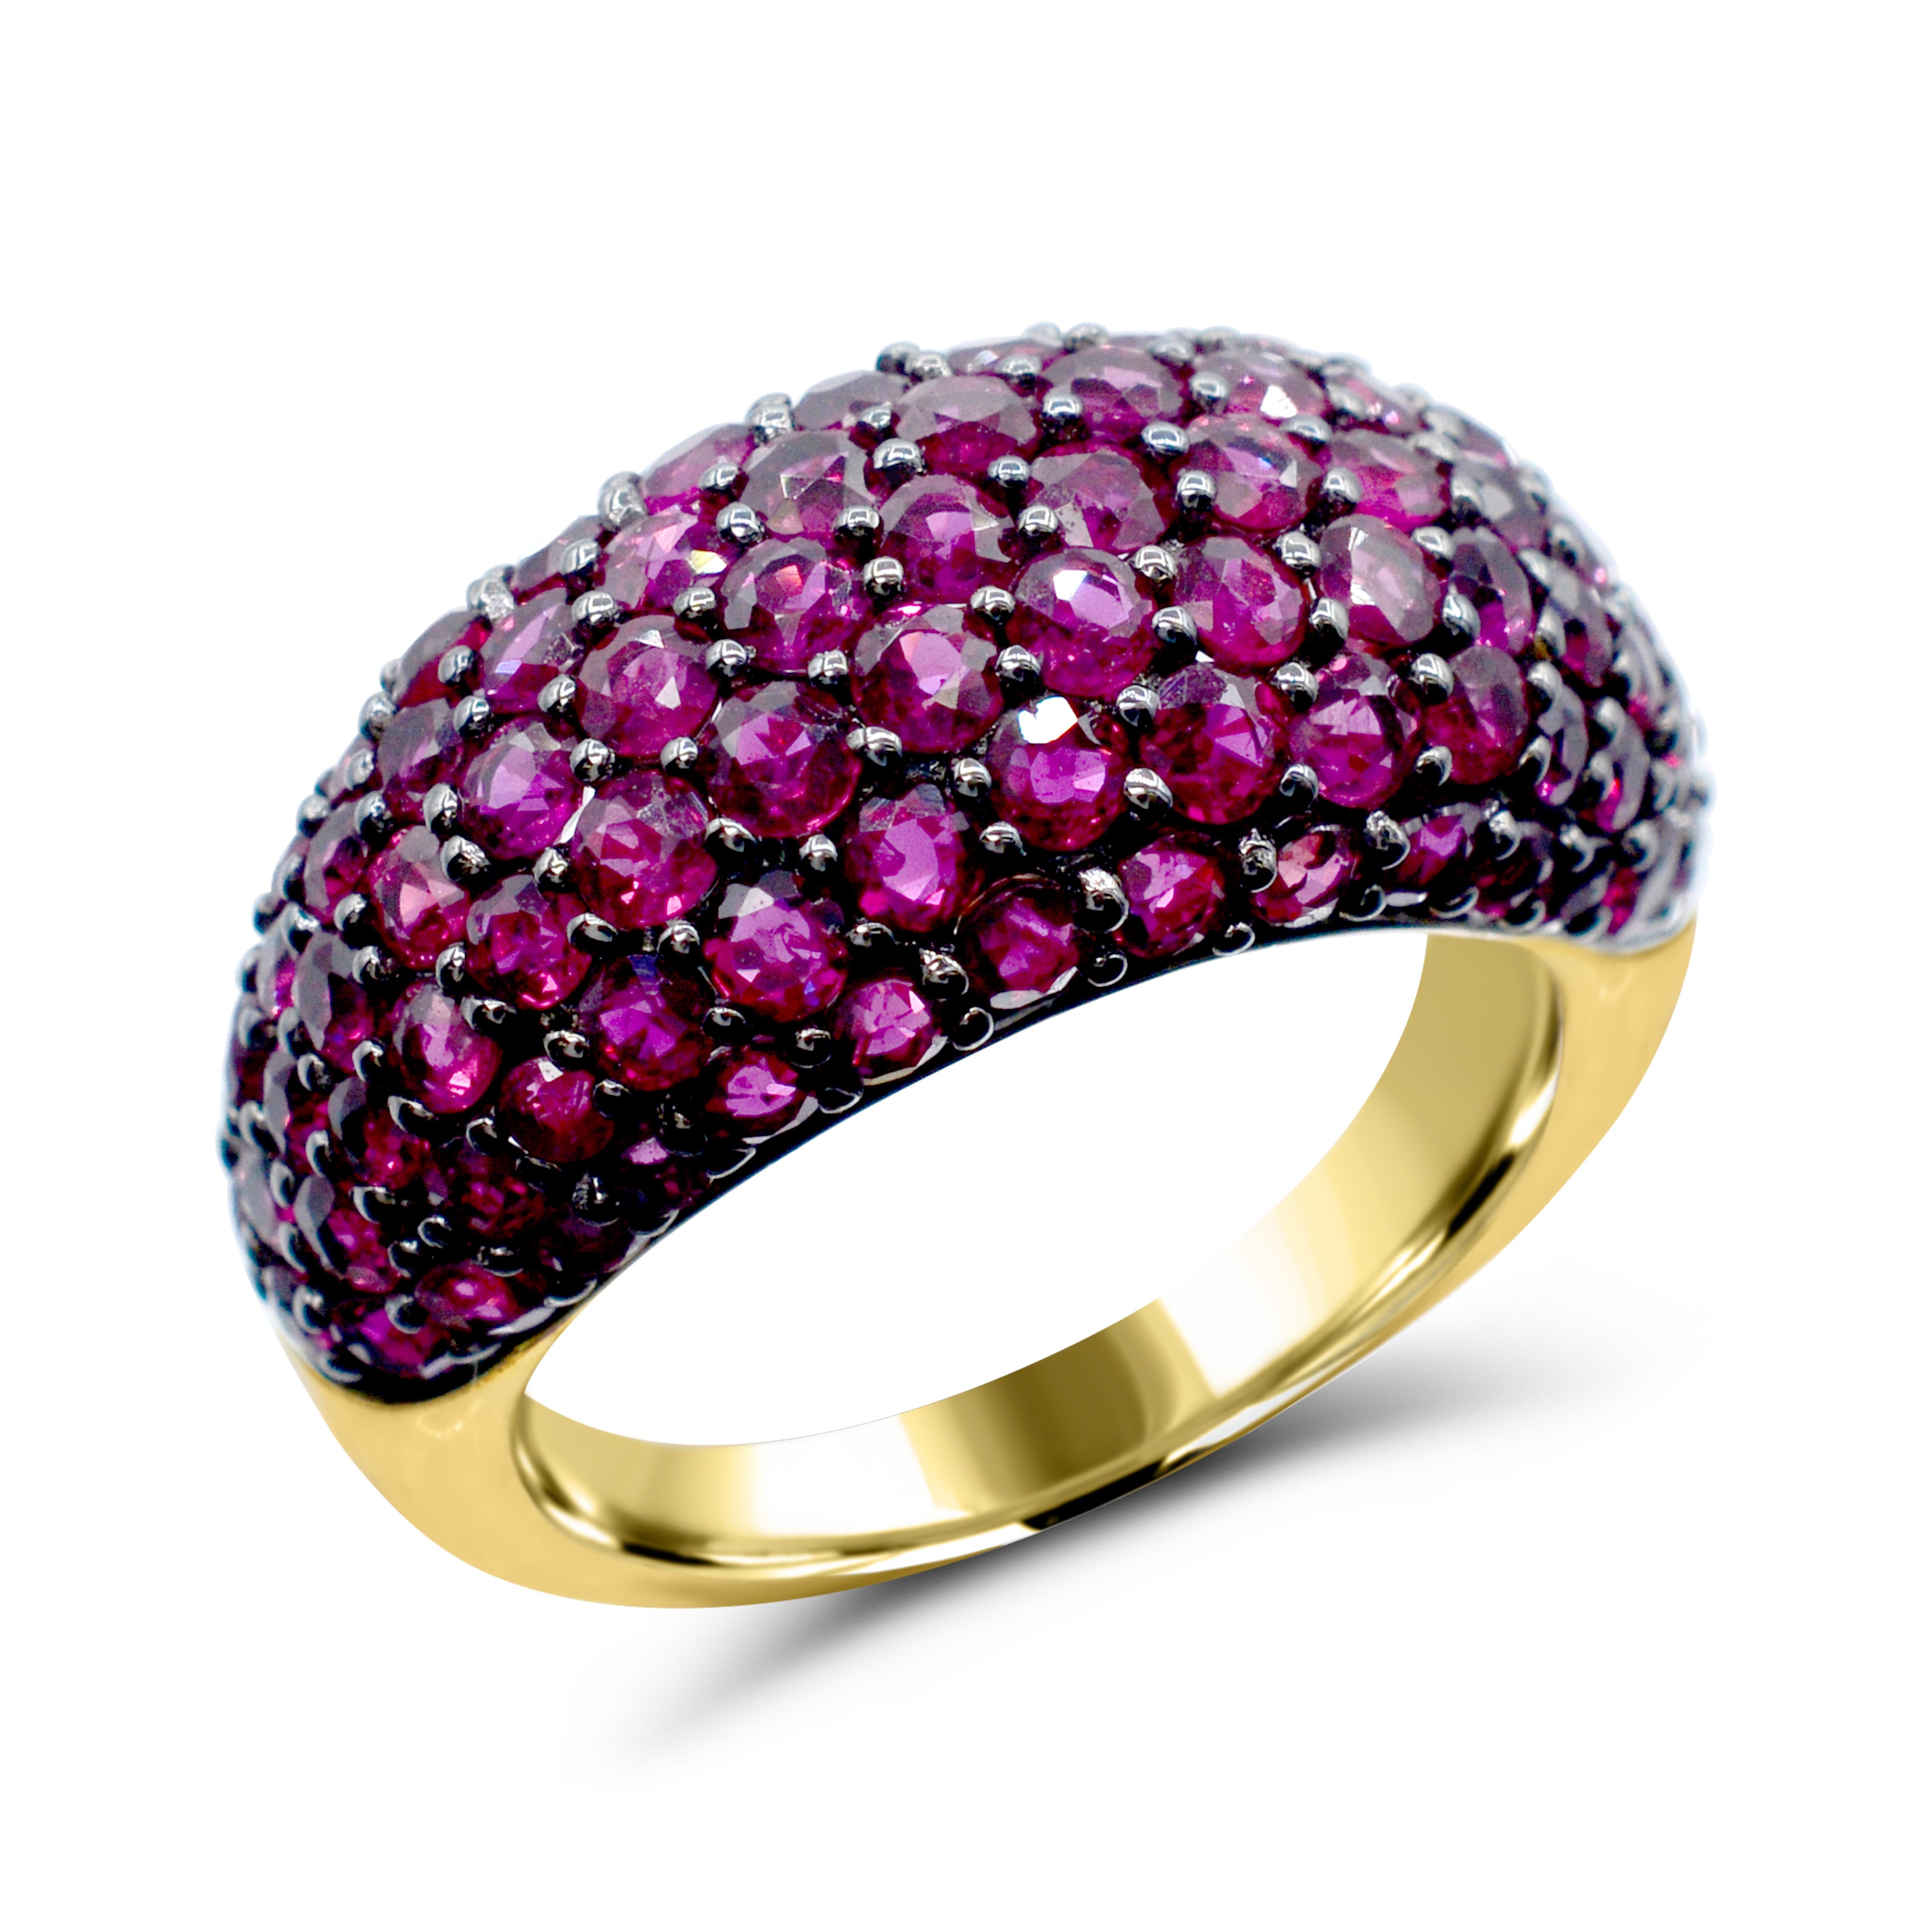 Whether worn as an everyday accessory or for special occasions, this exquisite Thai ruby ring is a timeless piece of jewelry that exudes luxury and charm. It can be passed down through generations, serving as a cherished heirloom and a symbol of